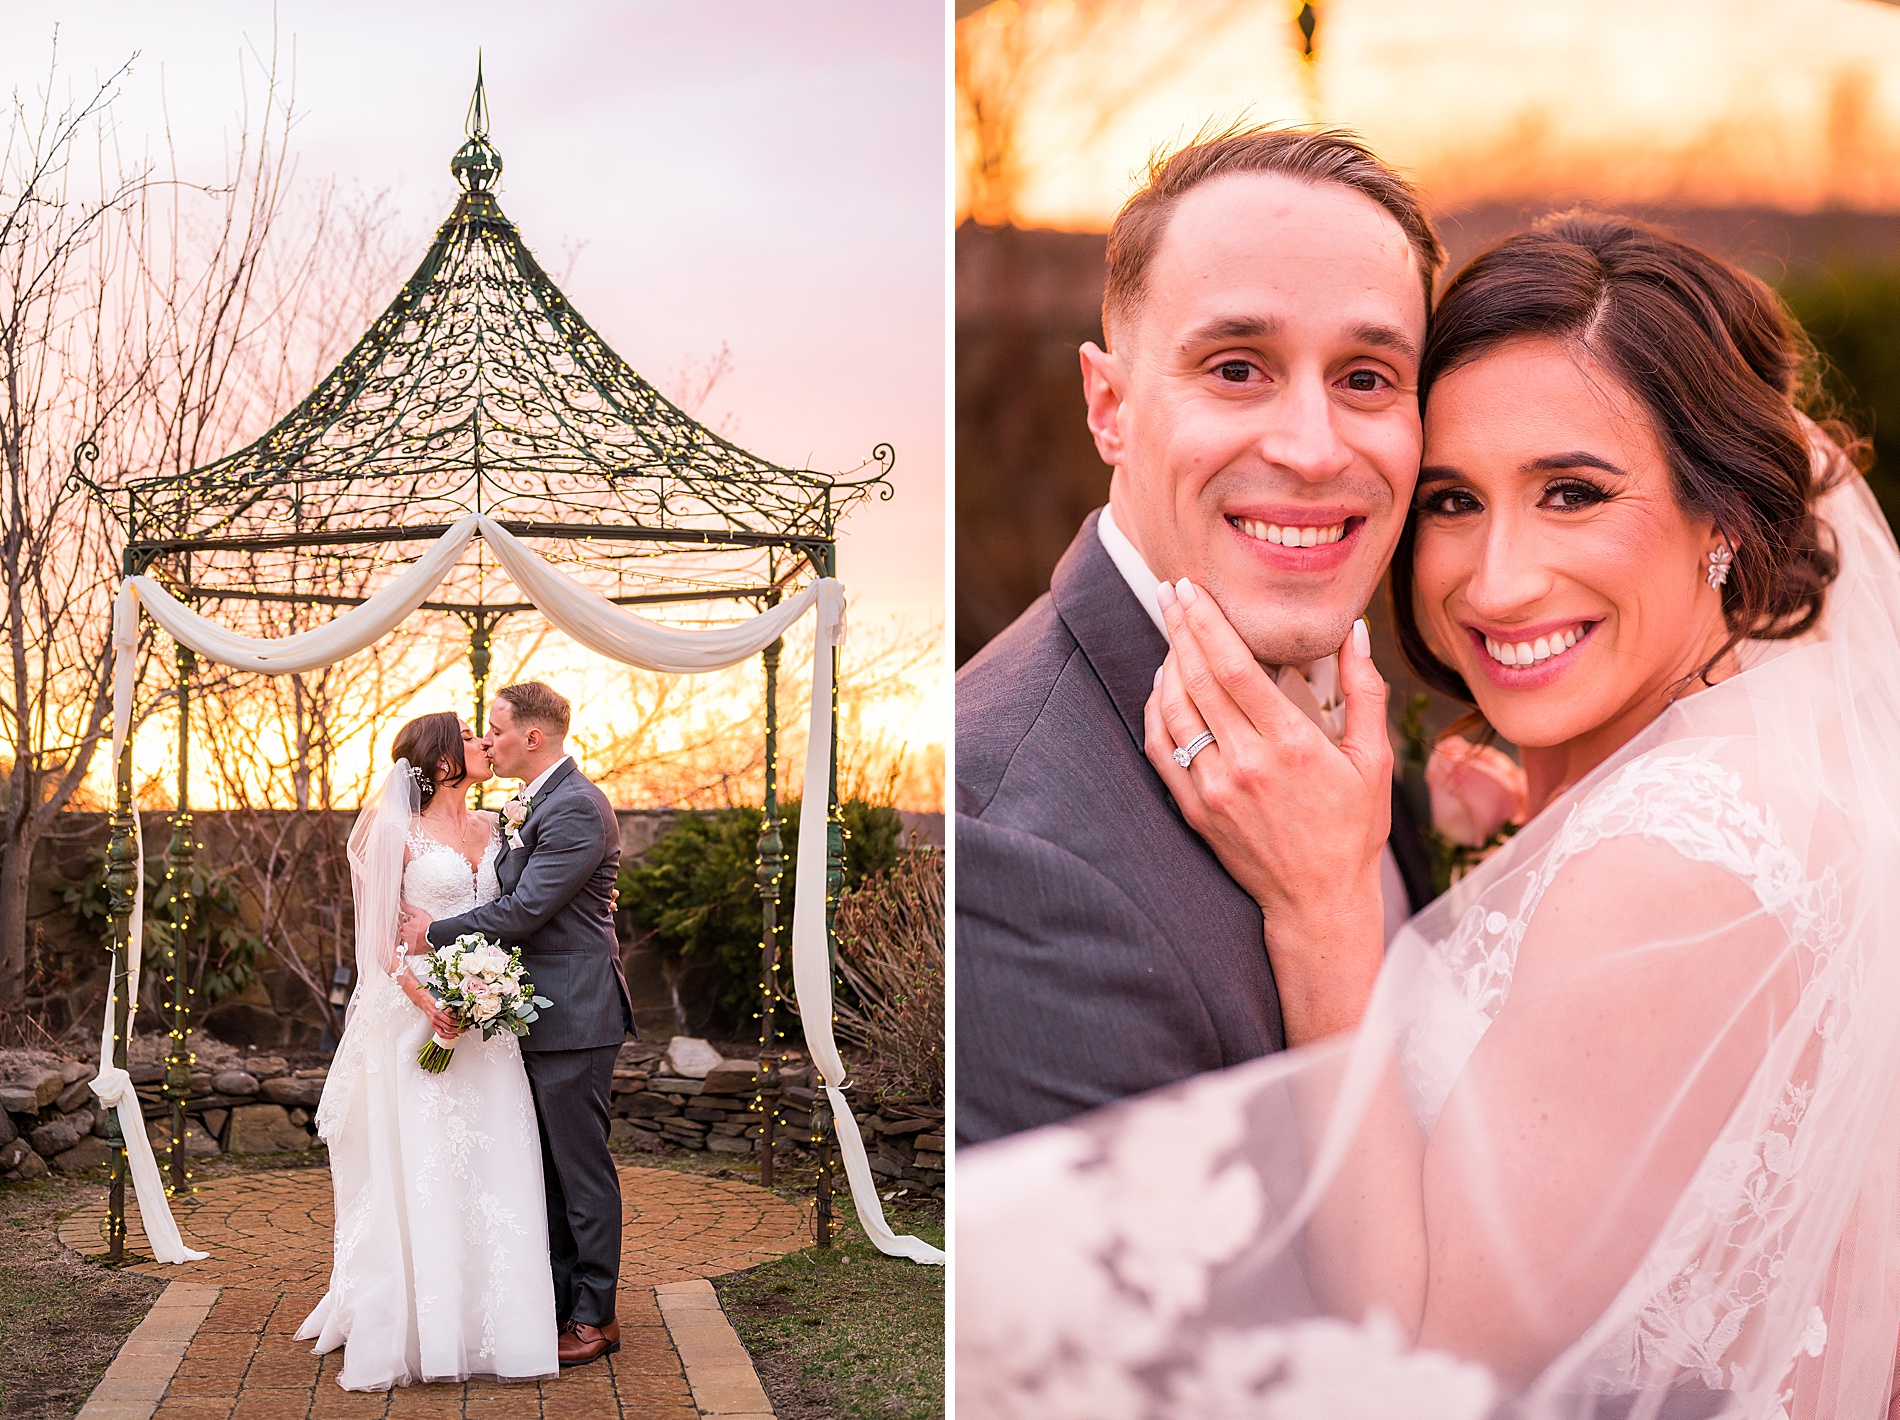 Wedding portraits at sunset in New England at Granite Rose 